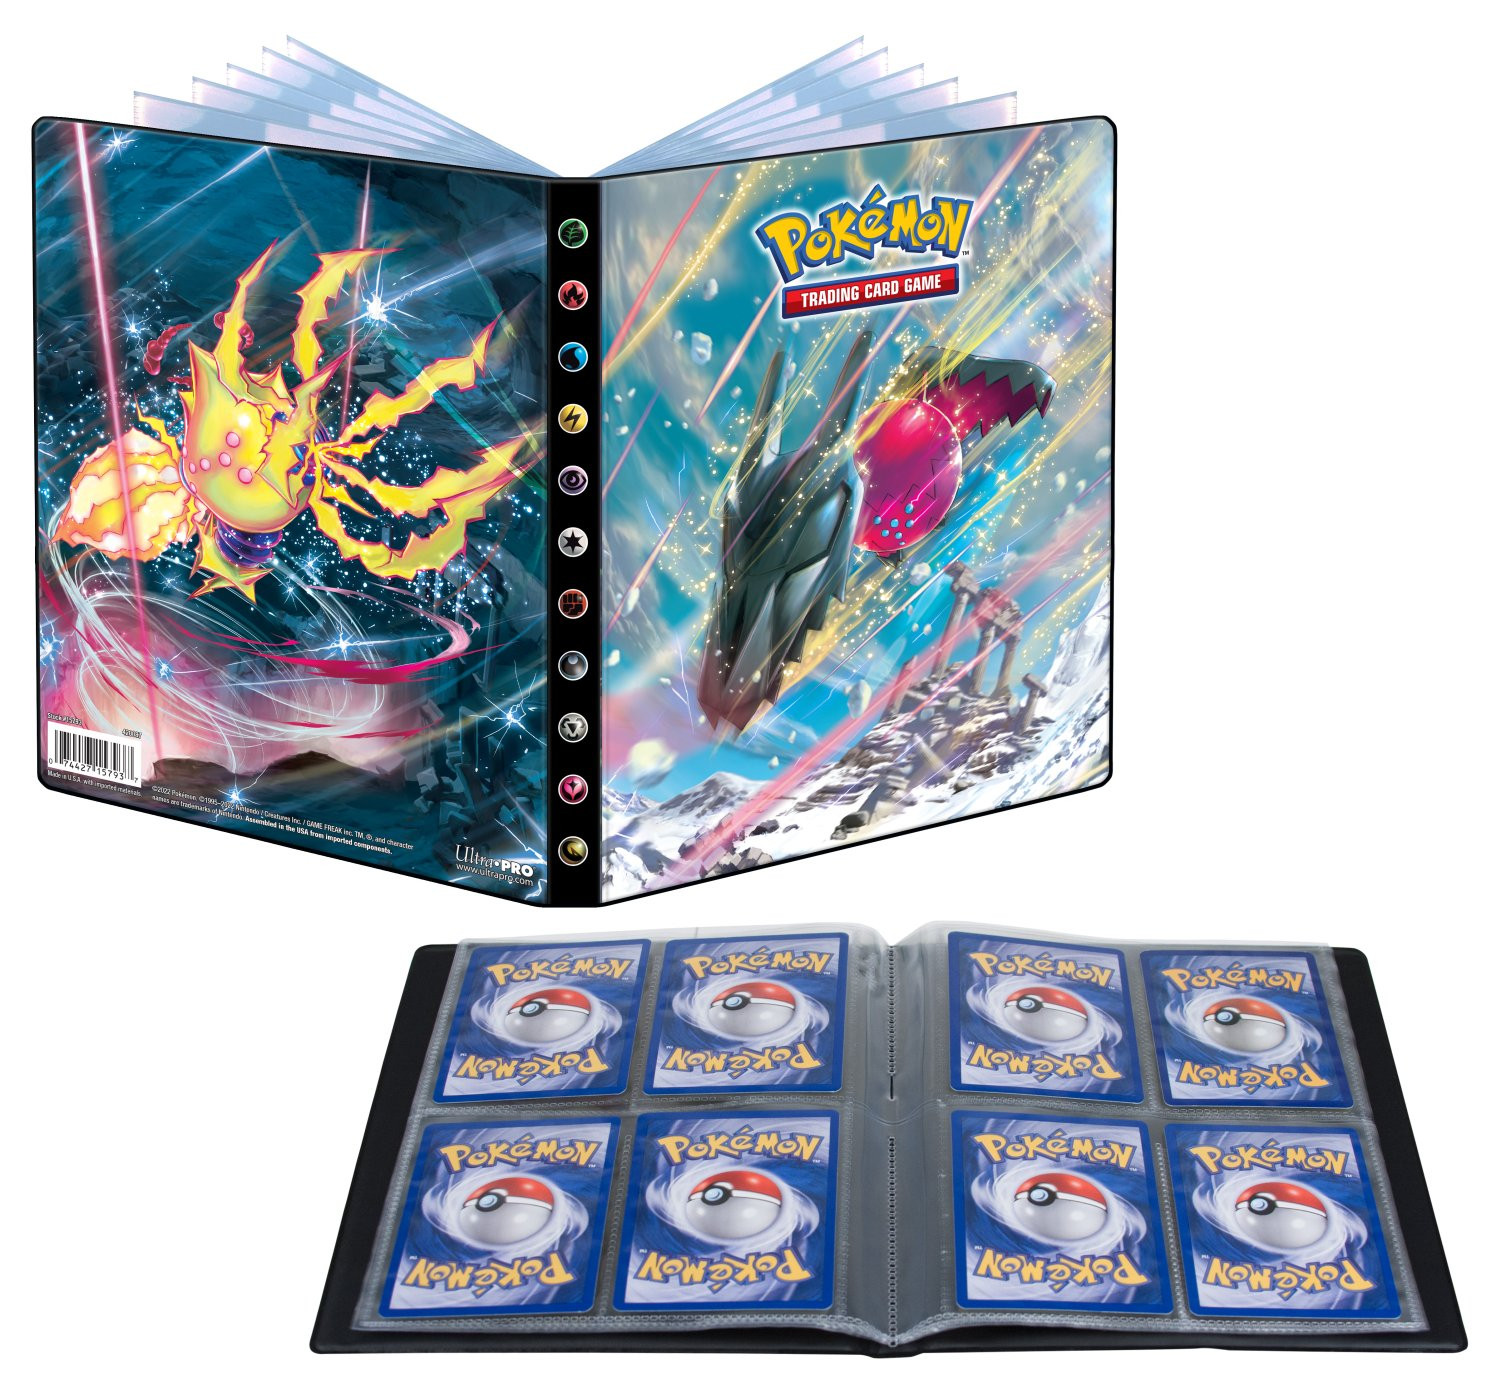 Album with 12 pages for Pokémon cards with Regidrago